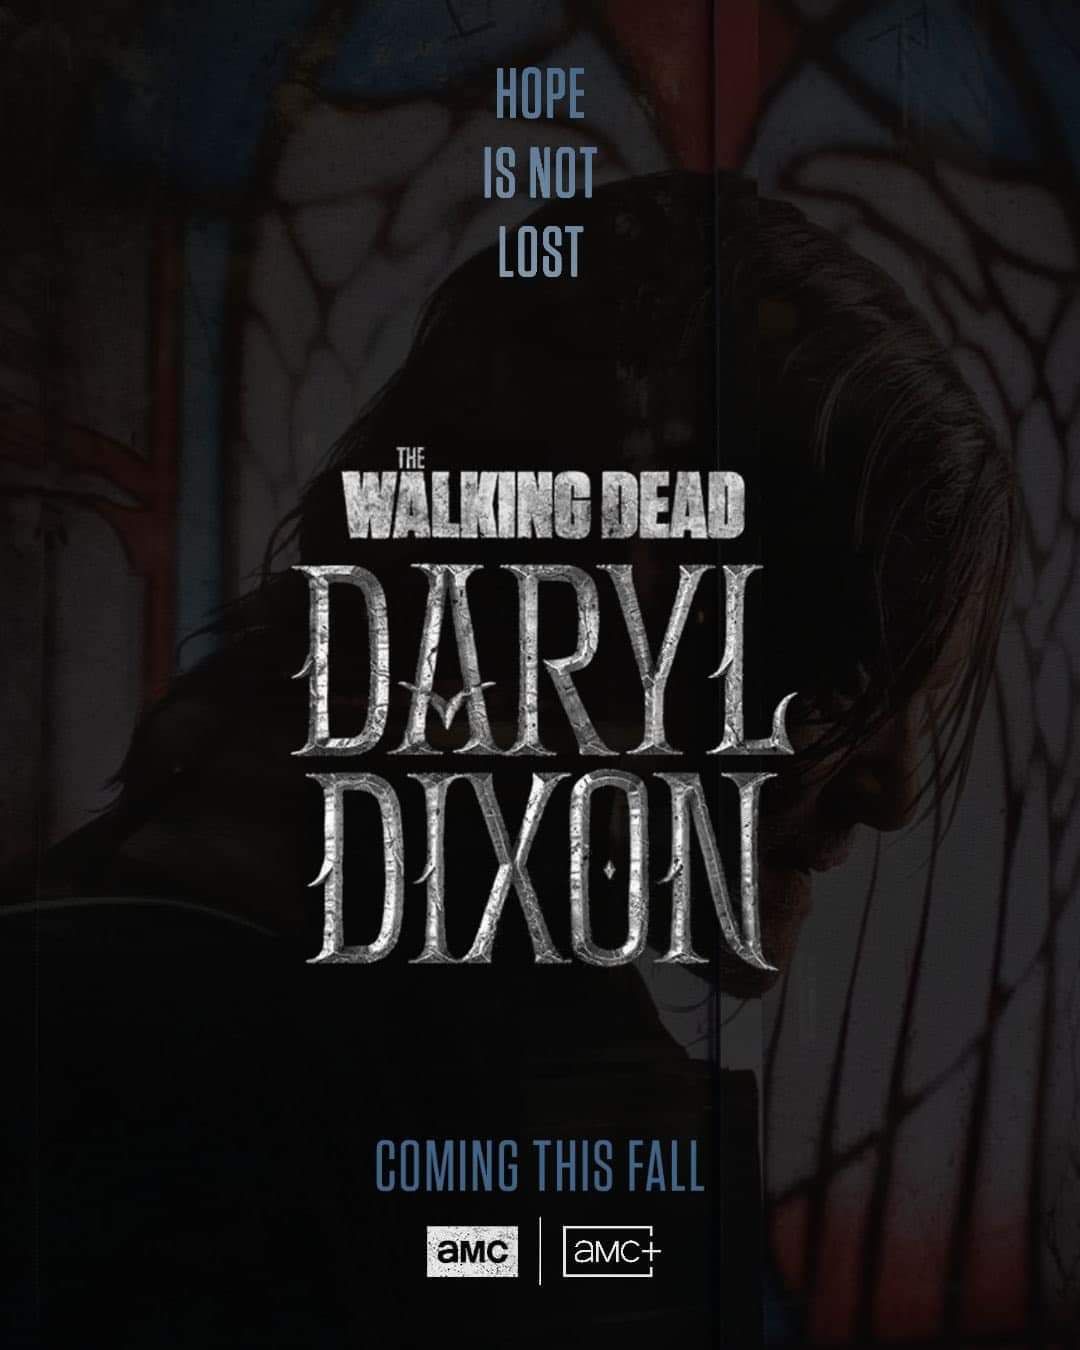 The Walking Dead: Daryl Dixon' Review: Finally, a Fun Zombie Spinoff